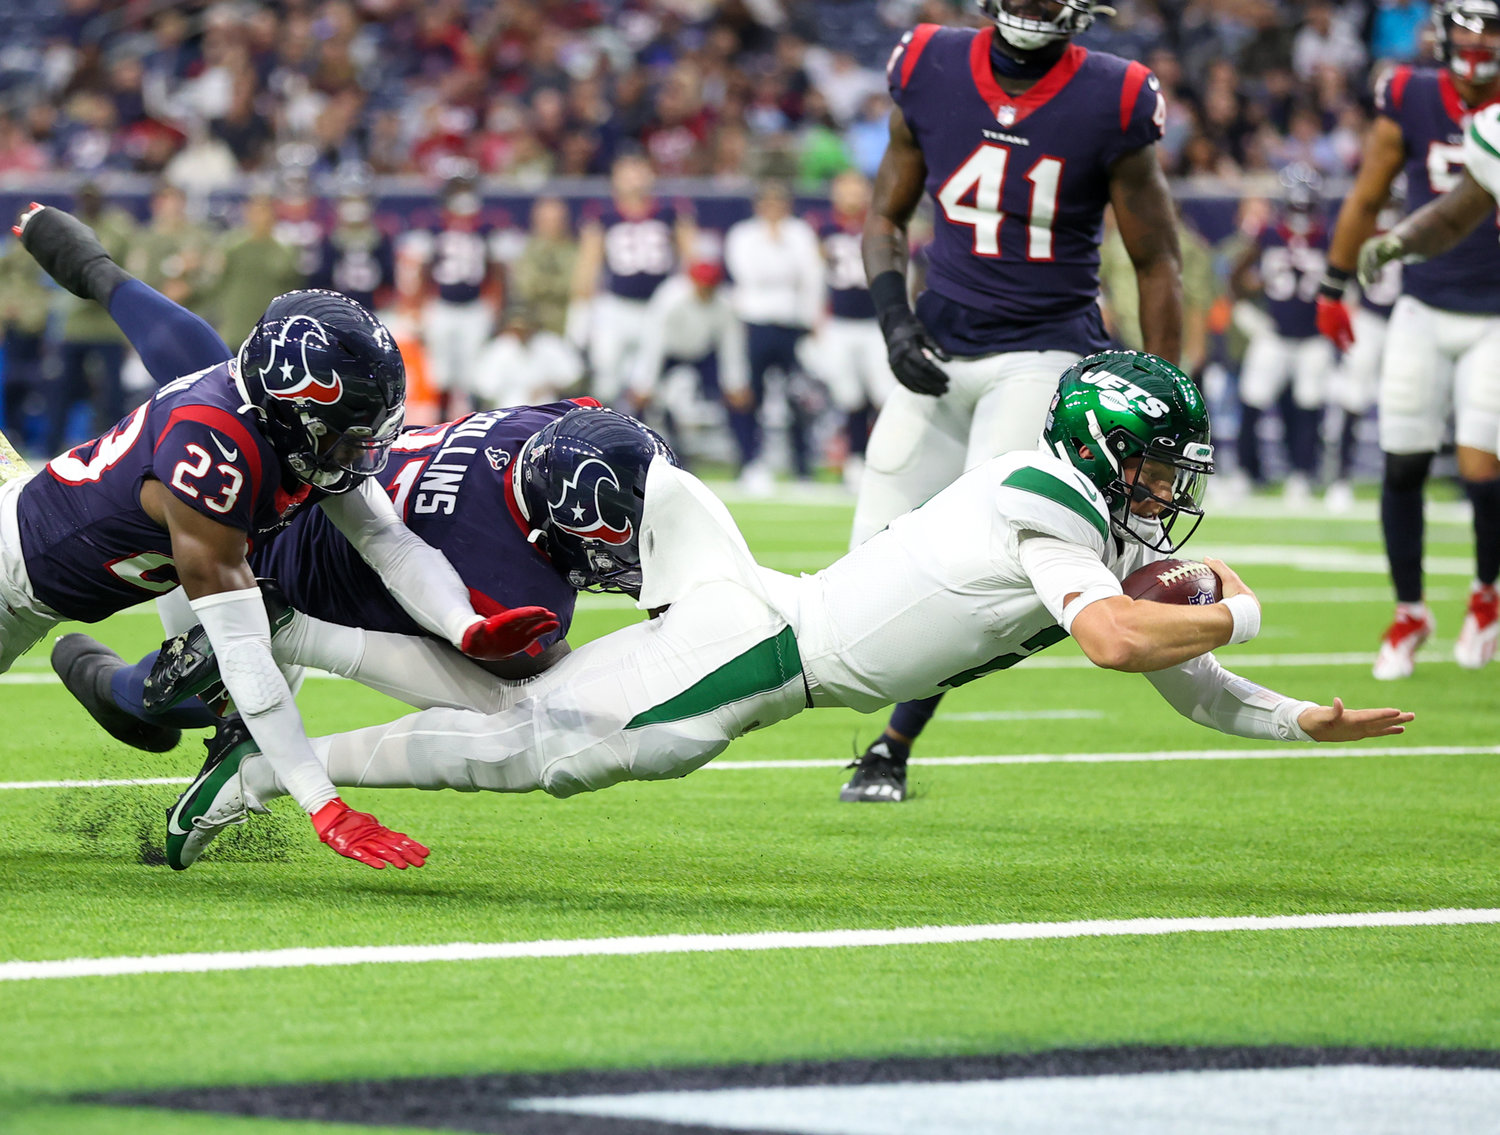 New York Jets quarterback Zach Wilson (2) dives into the end zone for a touchdown on a 4-yard carry during the third quarter of an NFL game between the Houston Texans and the New York Jets on November 28, 2021 in Houston, Texas. The Jets won, 21-14